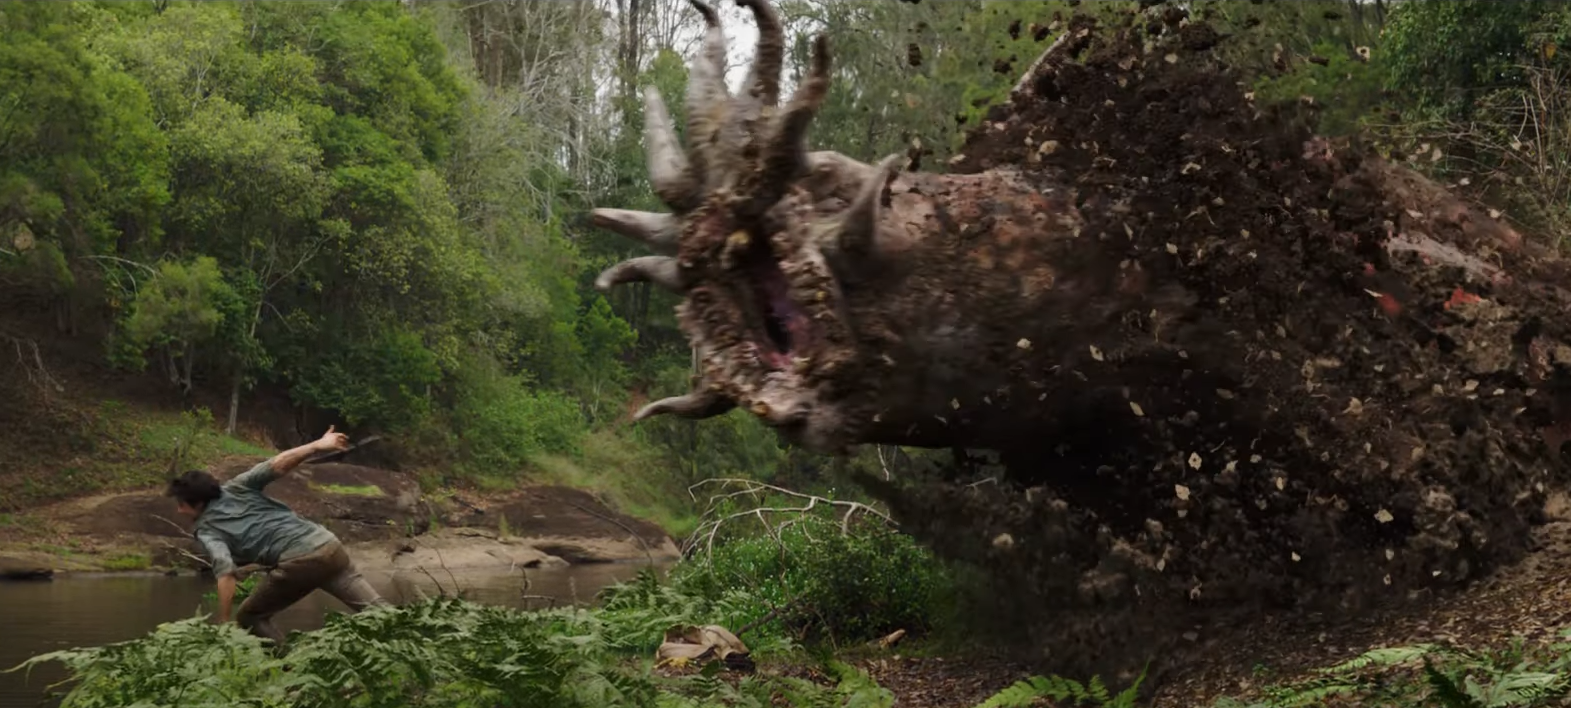 Video from Netflix Shows What Monsters from 'The Ritual' and 'Army